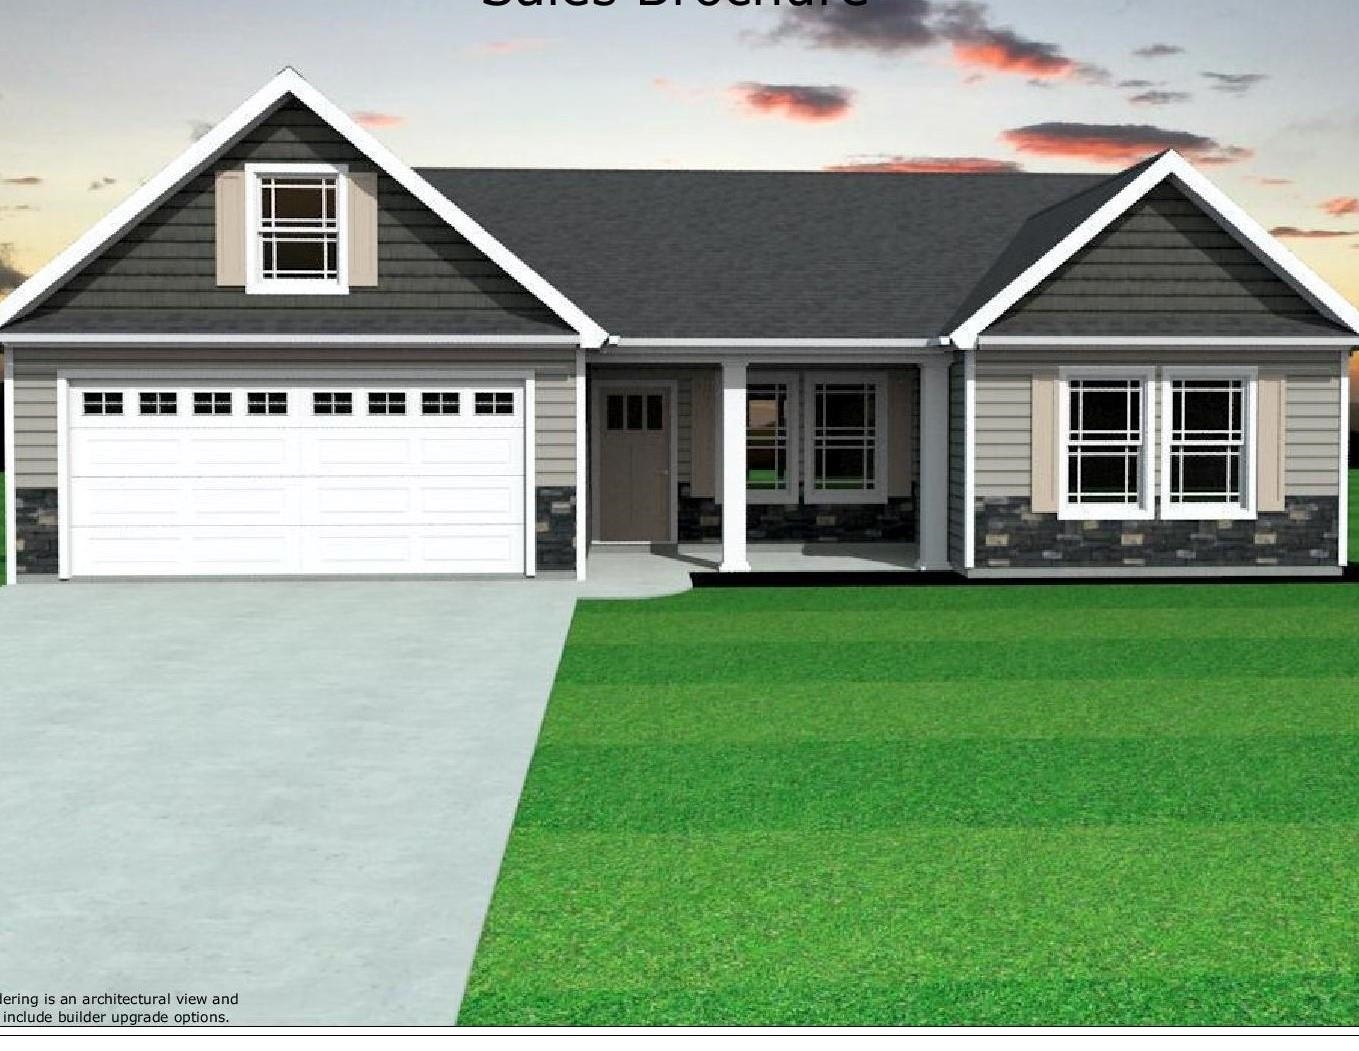 This is the STARTEX floorplan. Construction beginning soon on this home featuring 3 bedrooms, 2 bathrooms, gas fireplace, trey ceiling with rope lighting in master bedroom, and 12x12 back patio. Located in the NEW Elliott park community in Lyman just minutes from Spartanburg and Greenville. Call today for more info!